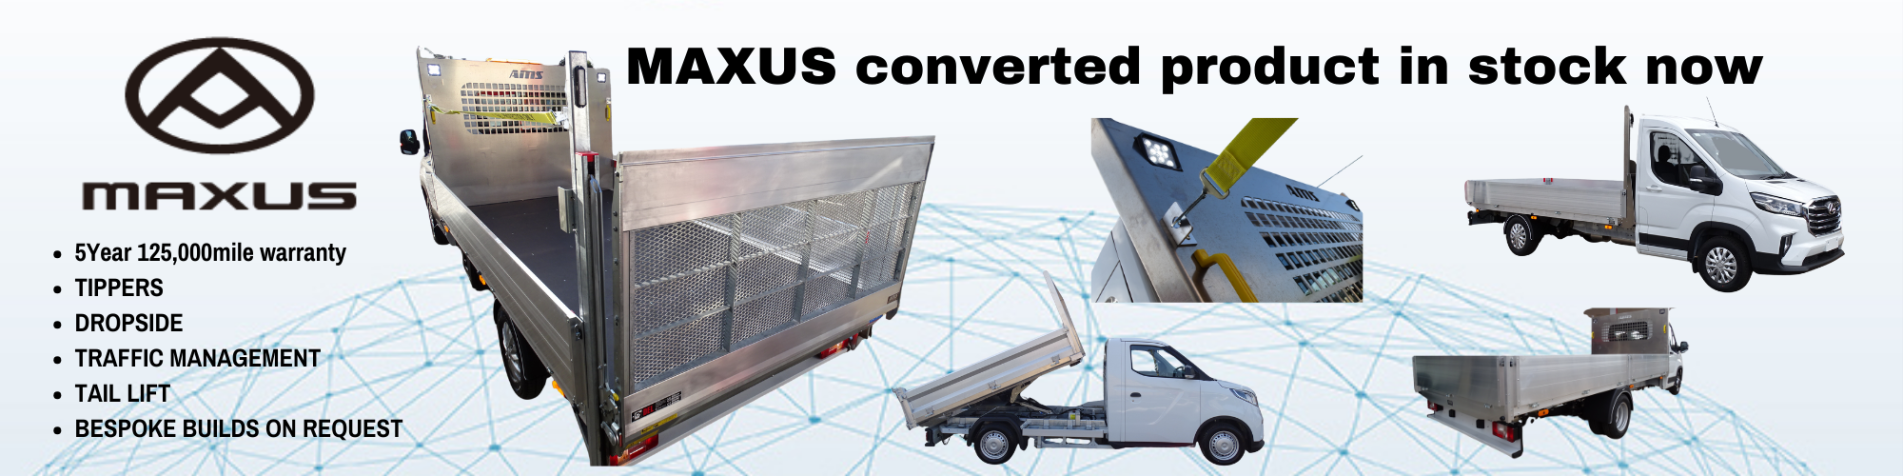 MAXUS converted product